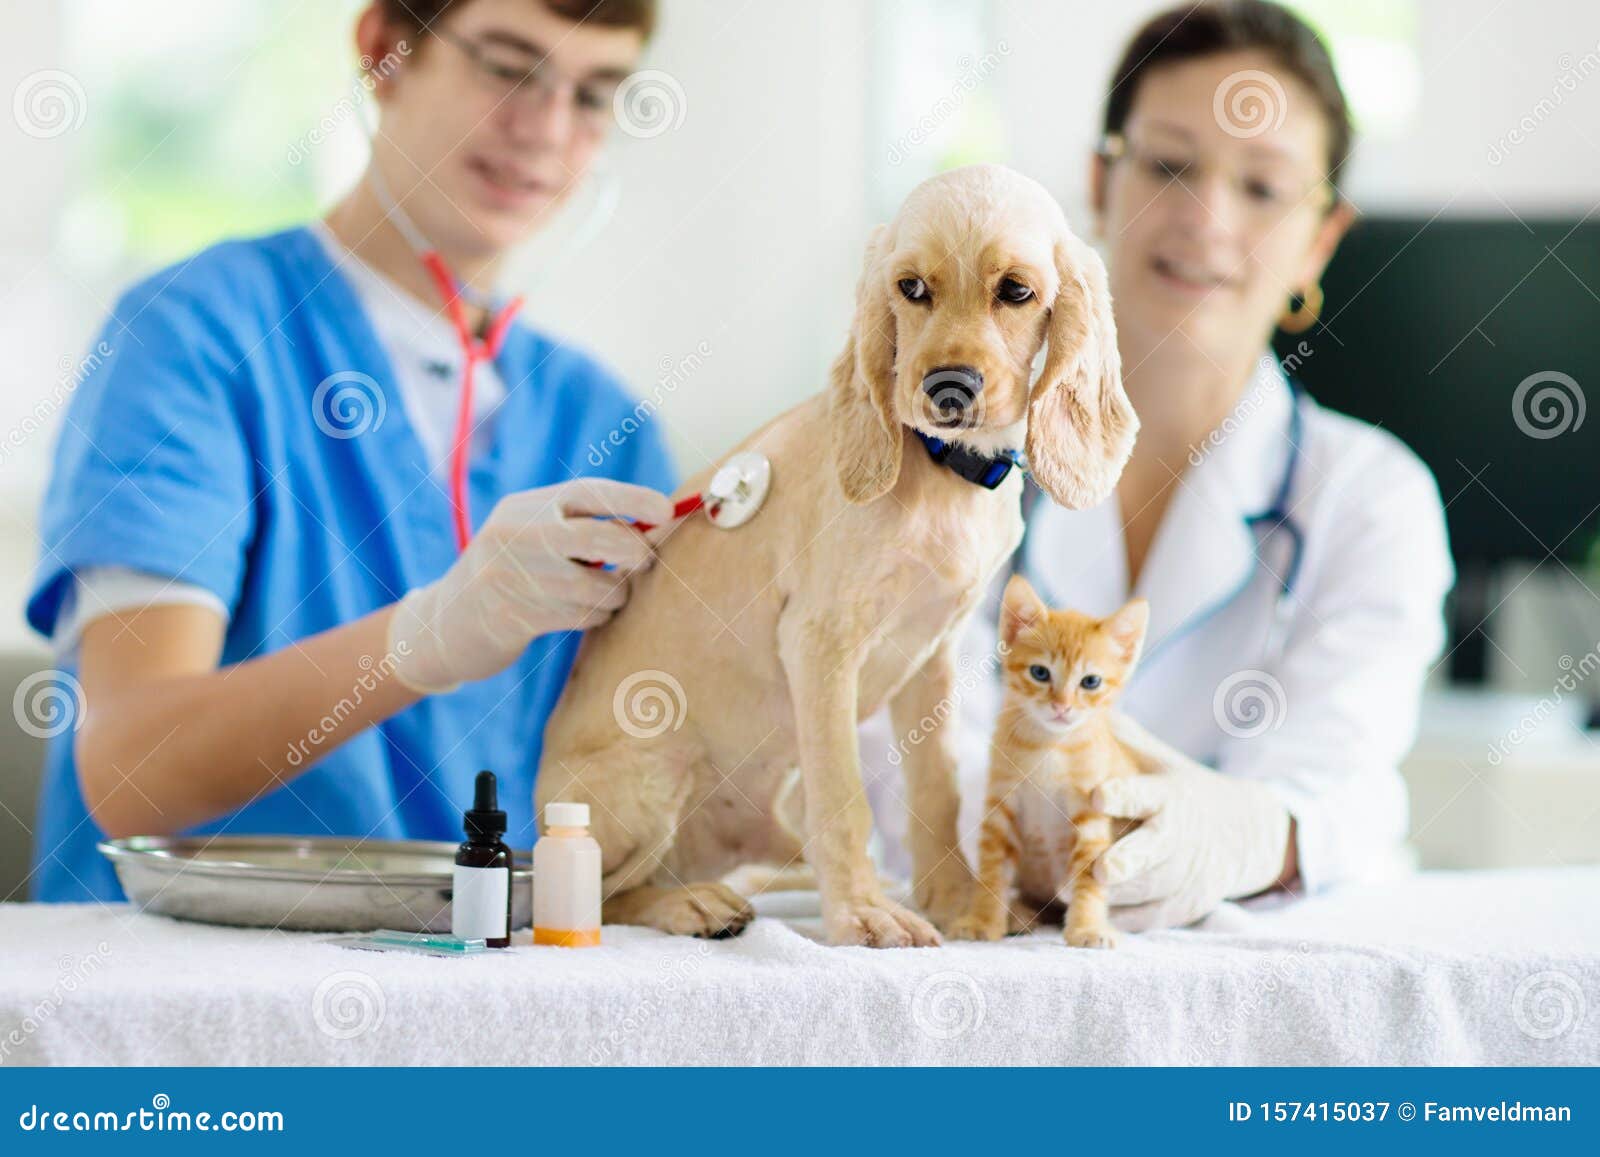 Vet With Dog And Cat. Puppy And Kitten At Doctor Stock Image Image of